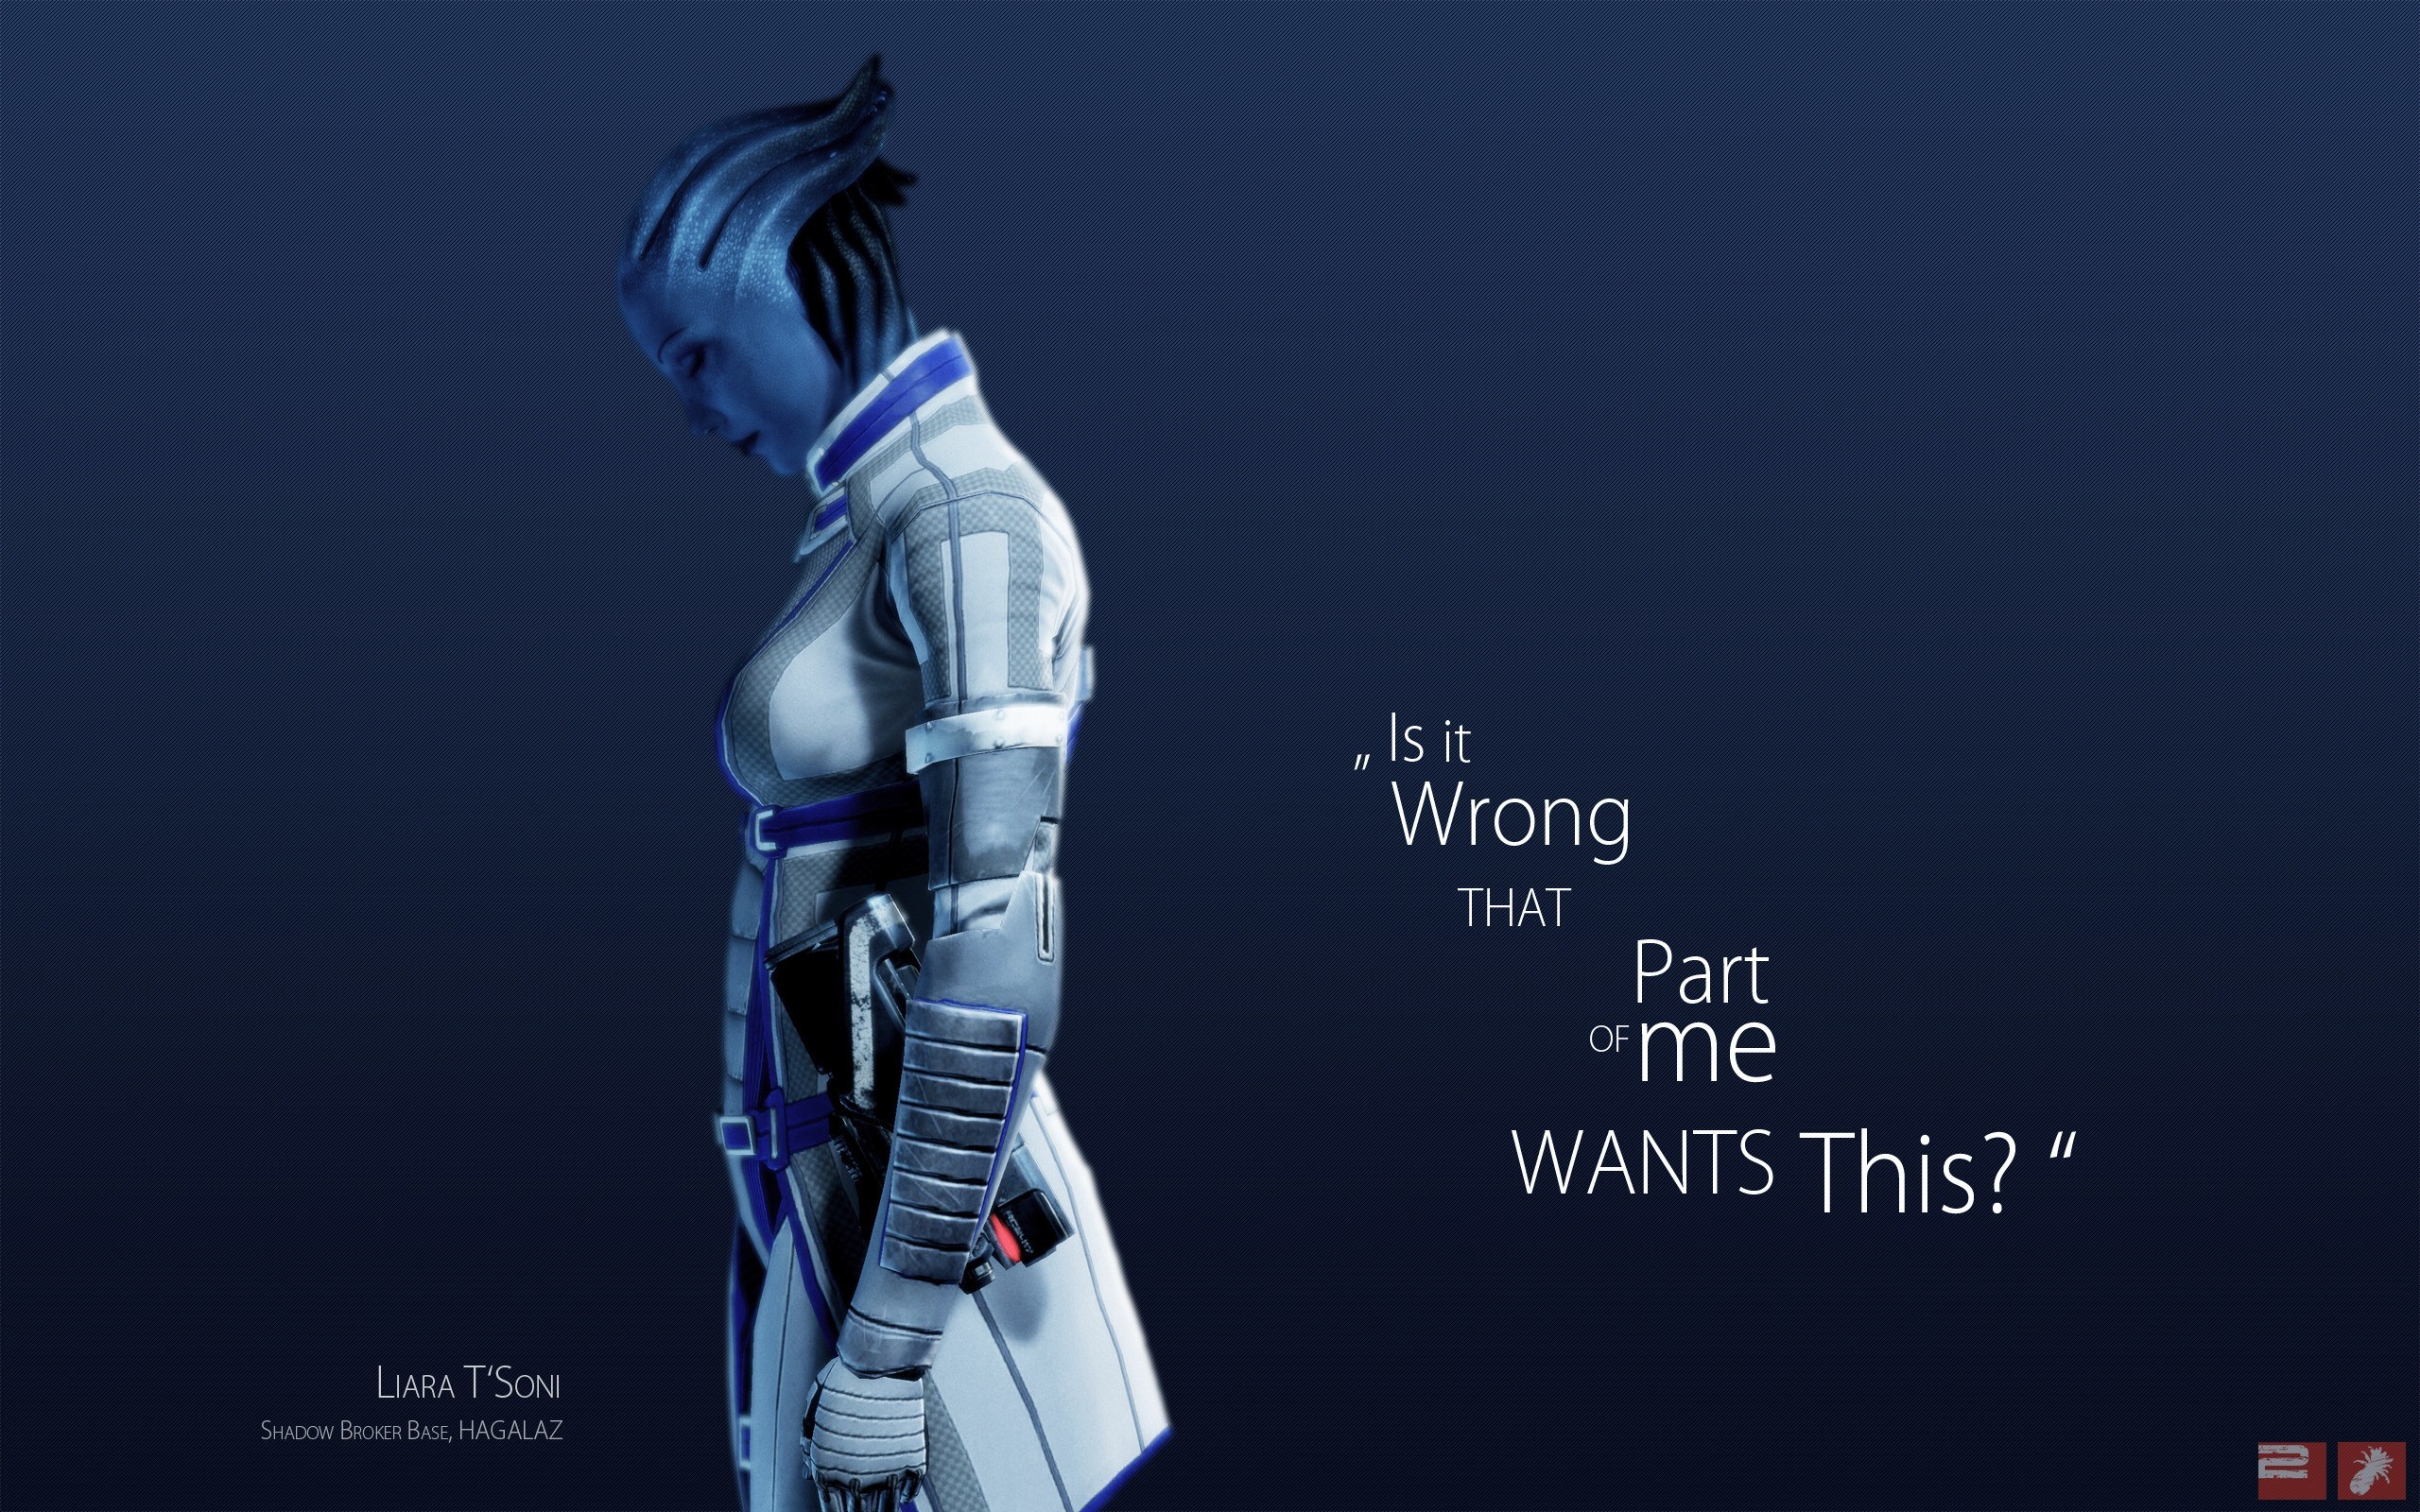 General 2560x1600 Mass Effect Mass Effect 2 Mass Effect 3 Liara T'Soni video games blue skin quote PC gaming video game art science fiction women video game girls Asari